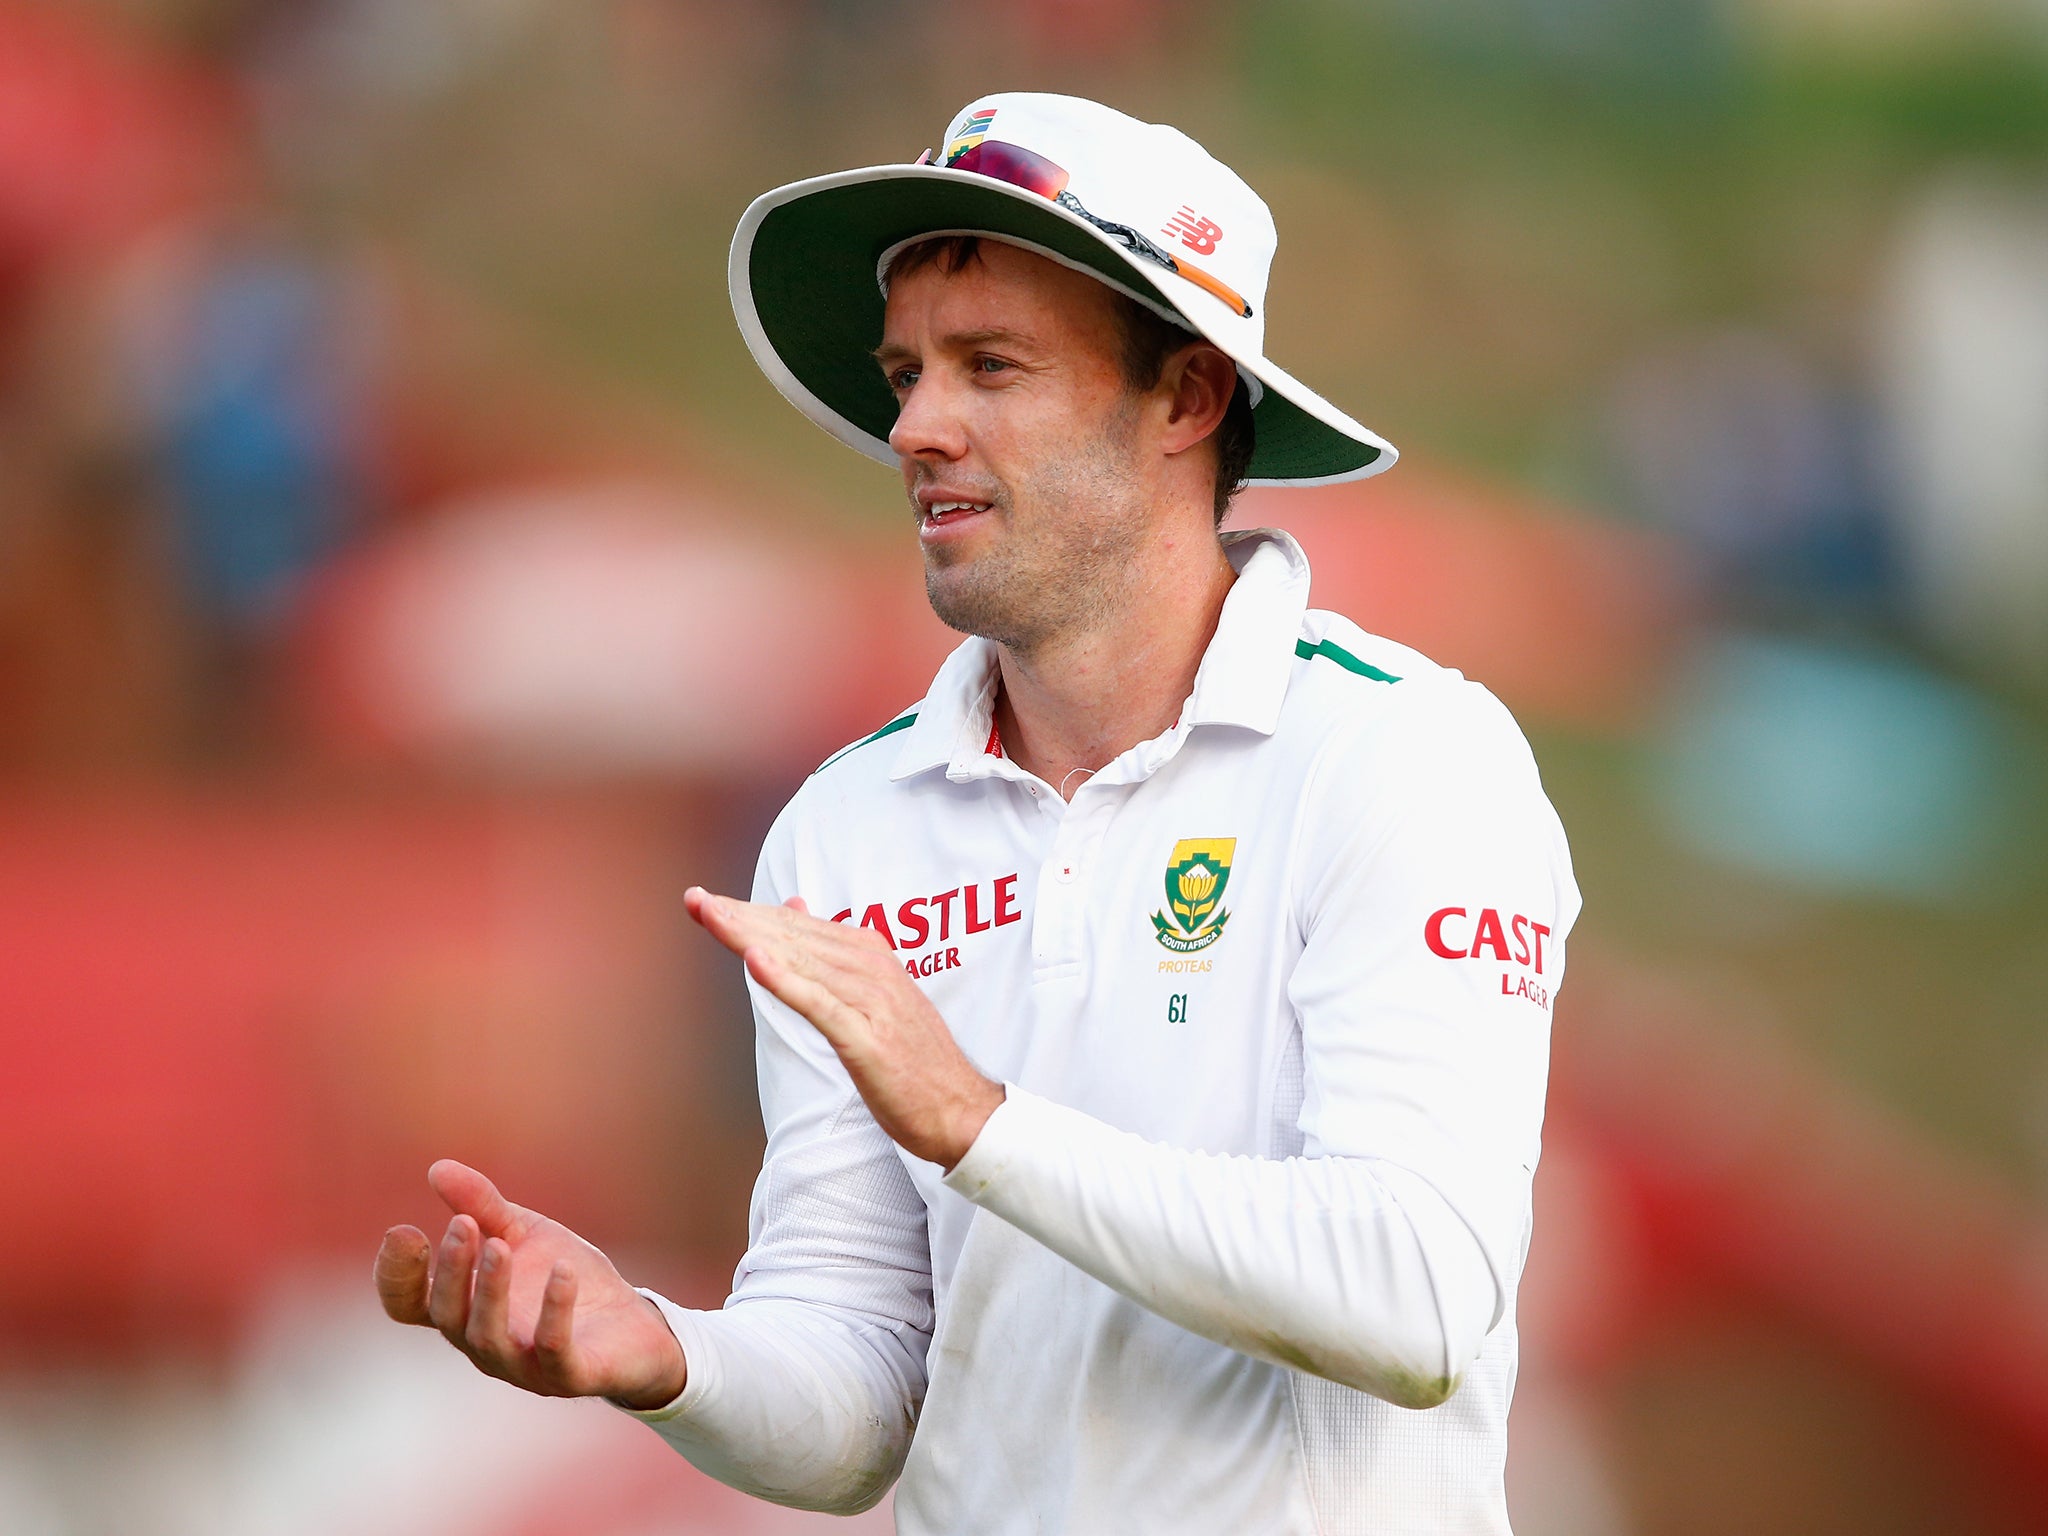 Have we seen the last of AB De Villiers in South Africa's Test whites?